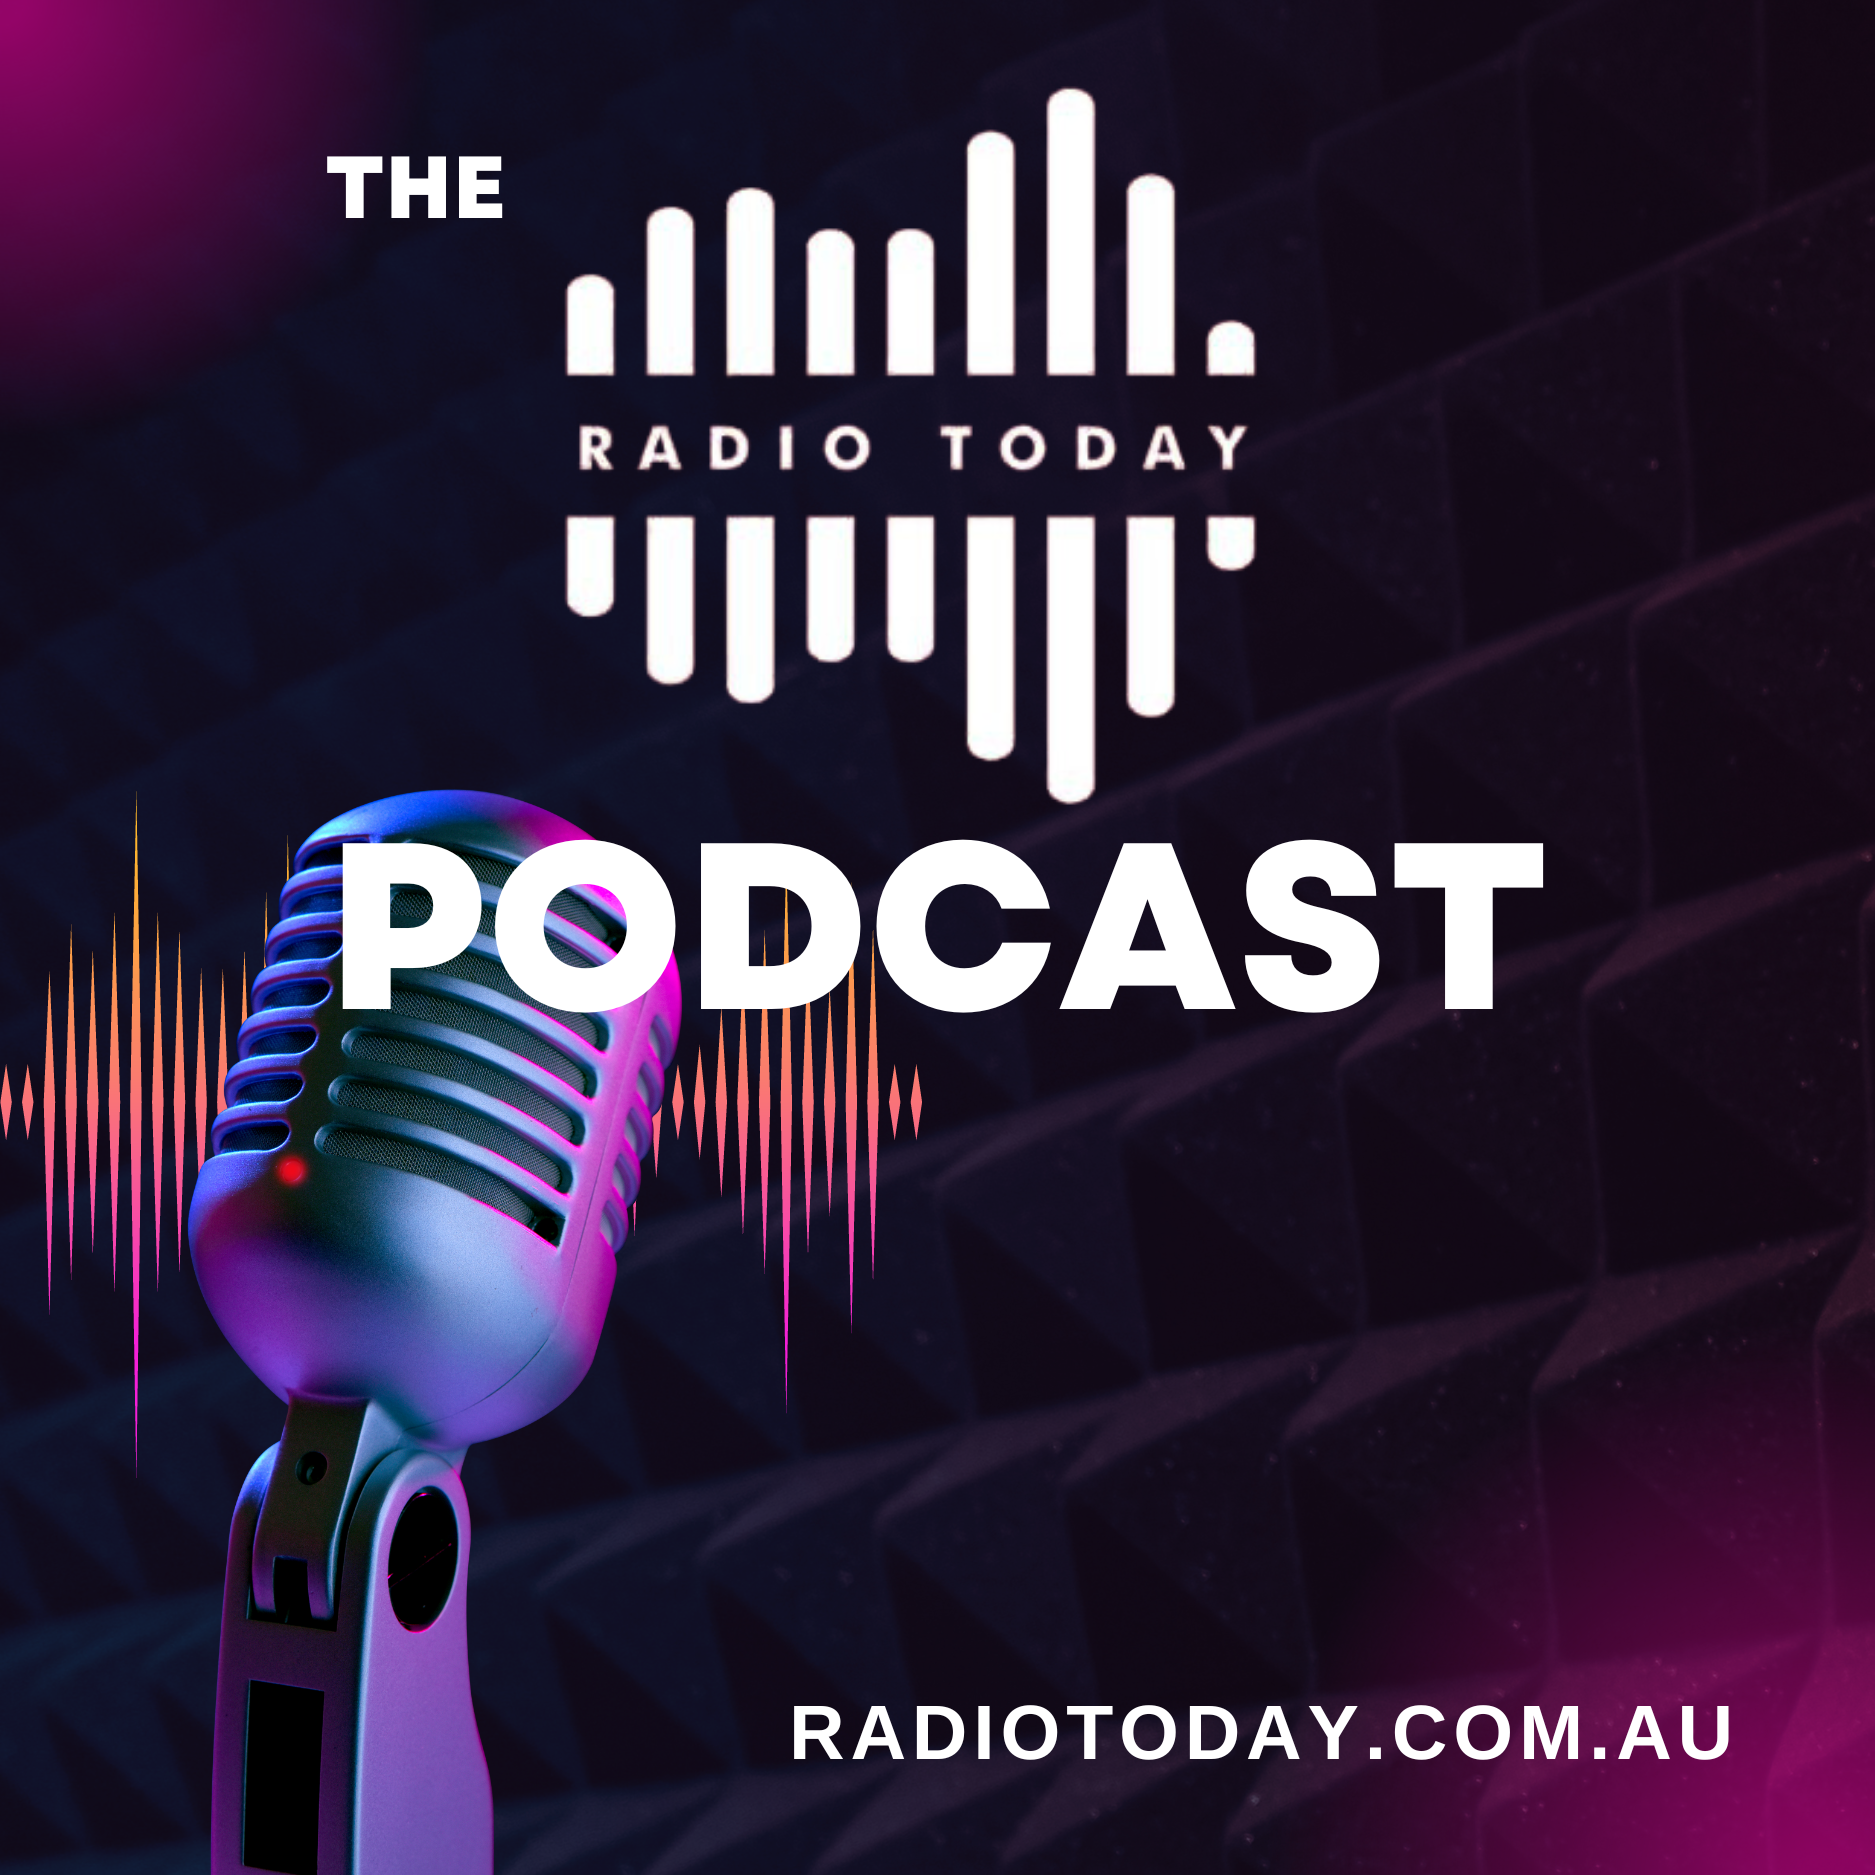 Radio Today: Everything radio Survey 4 results, triple j Hottest + More!